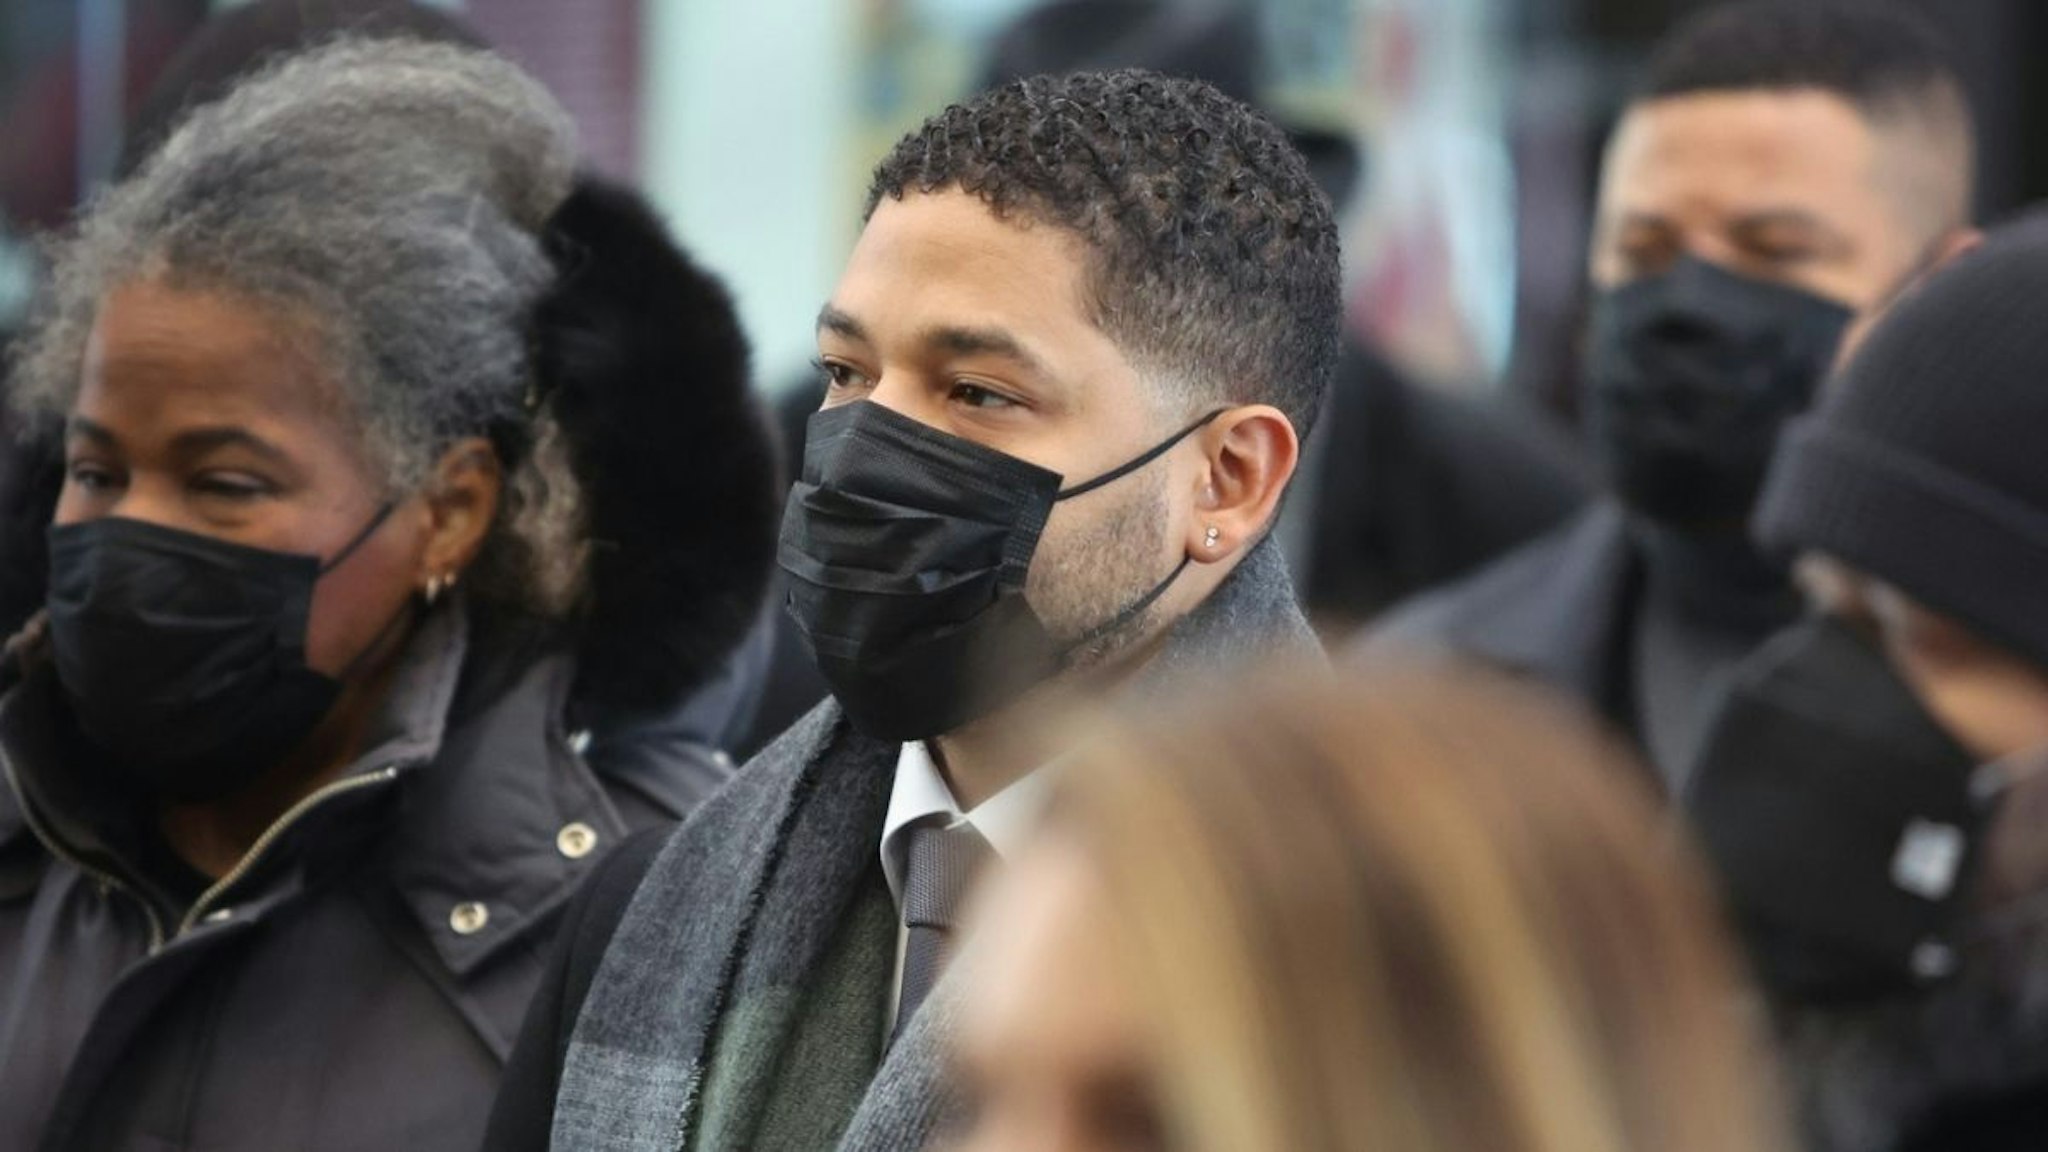 Former "Empire" actor Jussie Smollett arrives at the Leighton Courts Building for day six of his trial on December 7, 2021 in Chicago, Illinois.